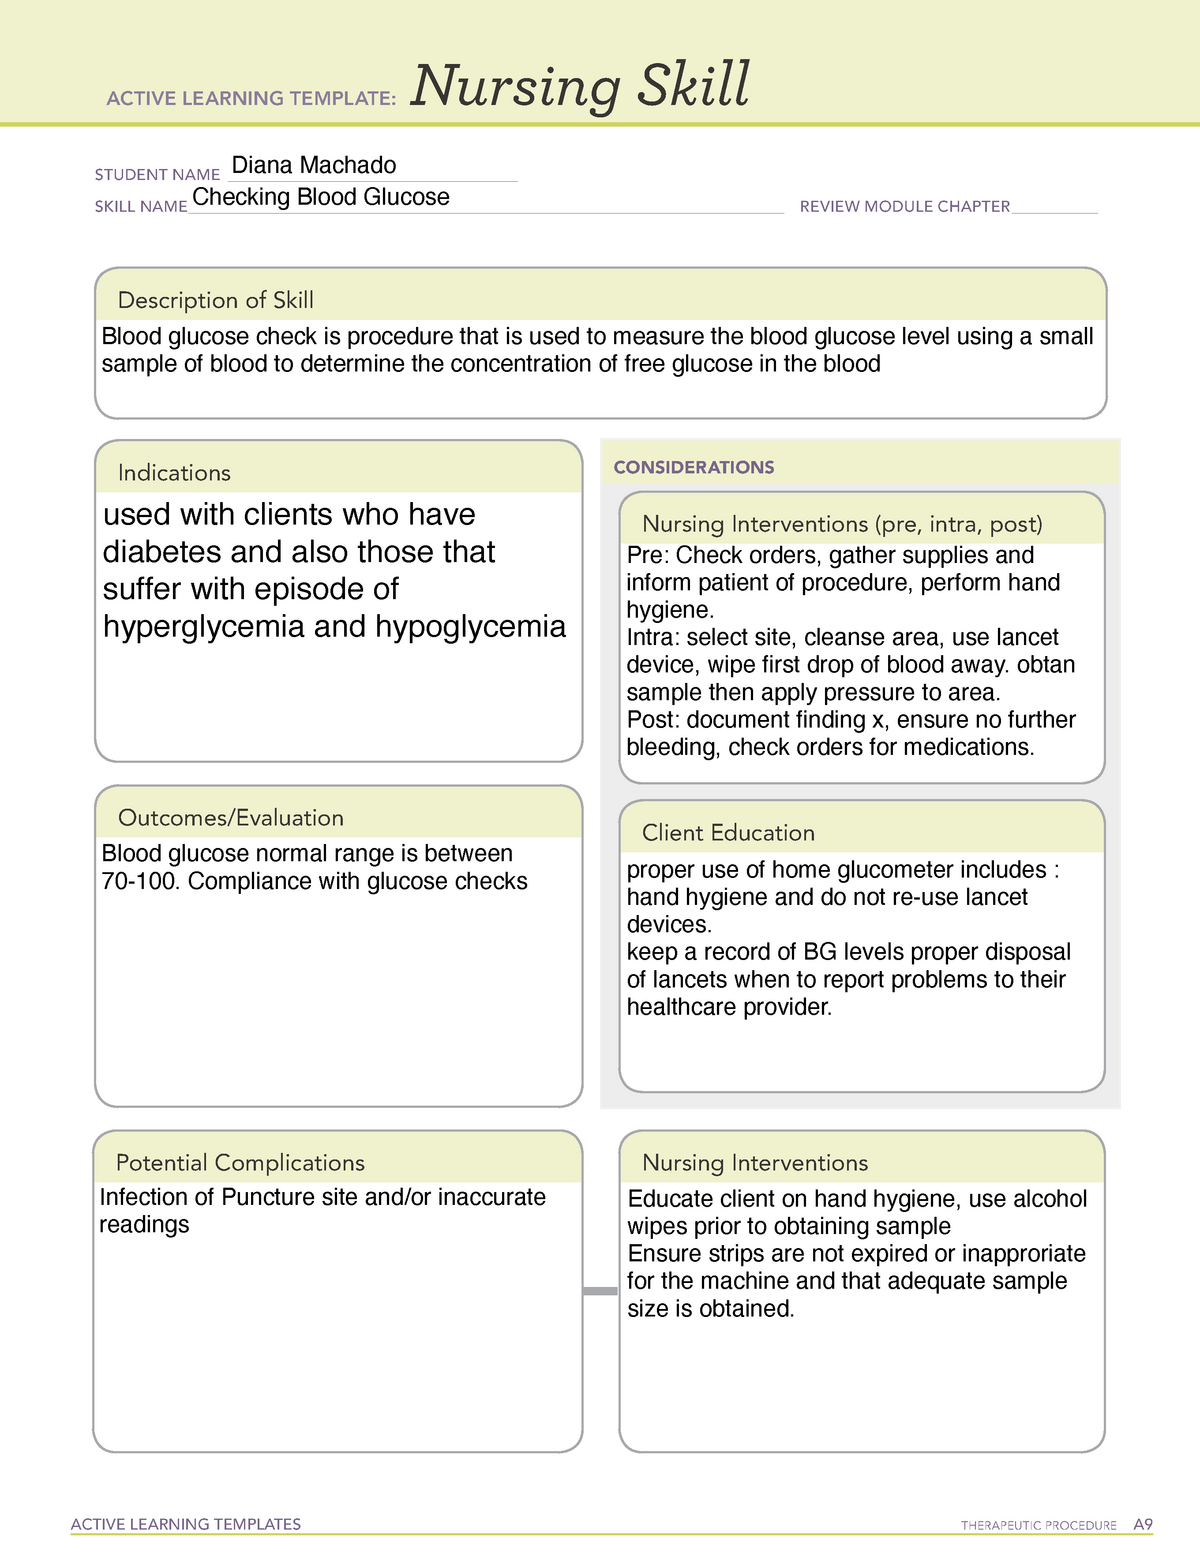 Diabetes wk 1 active learning template ACTIVE LEARNING TEMPLATES